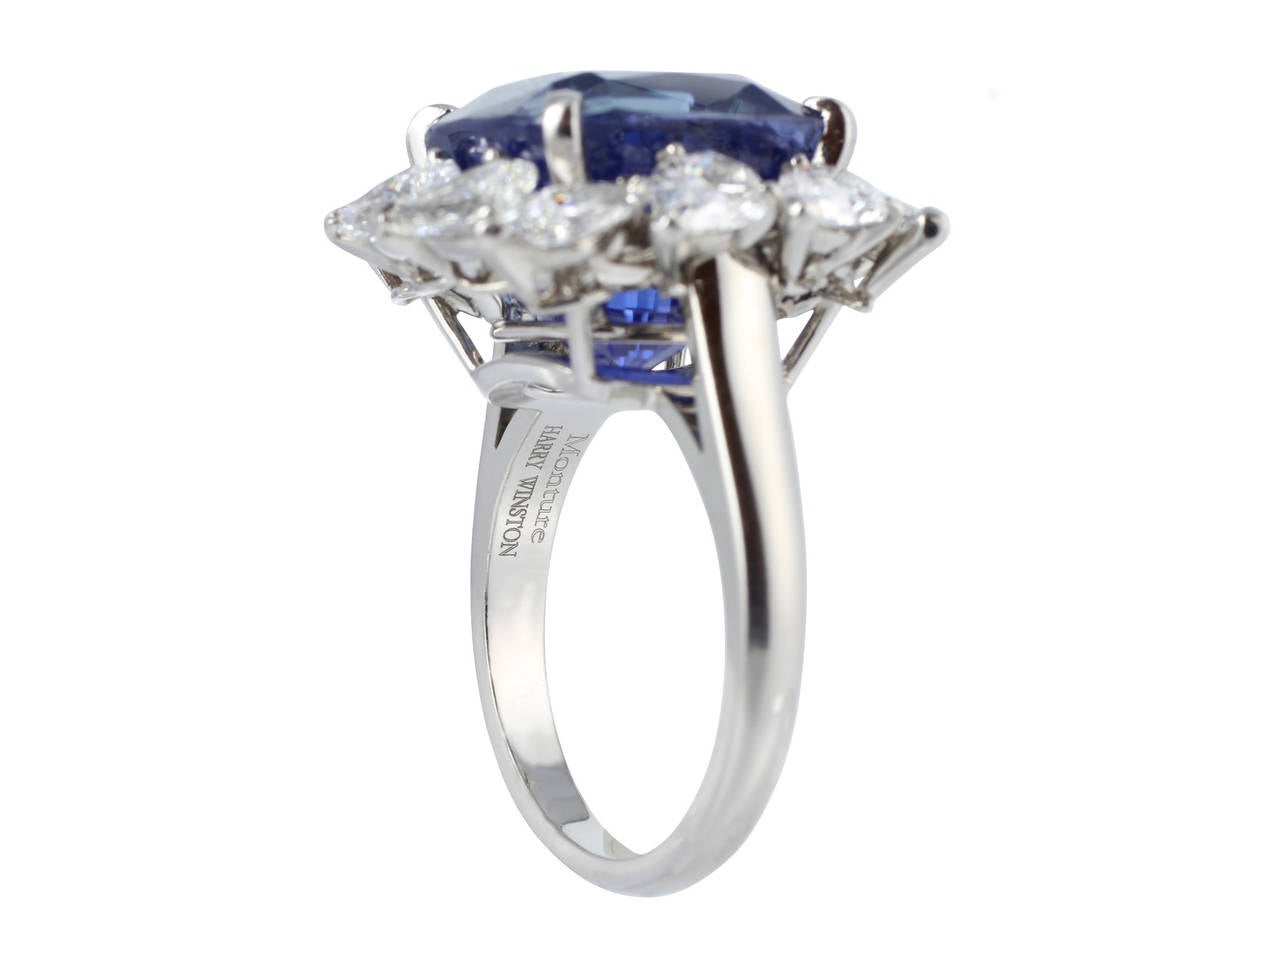 Platinum cluster ring consisting of 1 cushion cut sapphire weighing 16.11 carats, measuring 12.86 x 12.54 x 10.65mm, Madagascar origin with GIA certificate #5151209638. The center stone is surrounded by 1 row of 12 pear shape diamonds having an